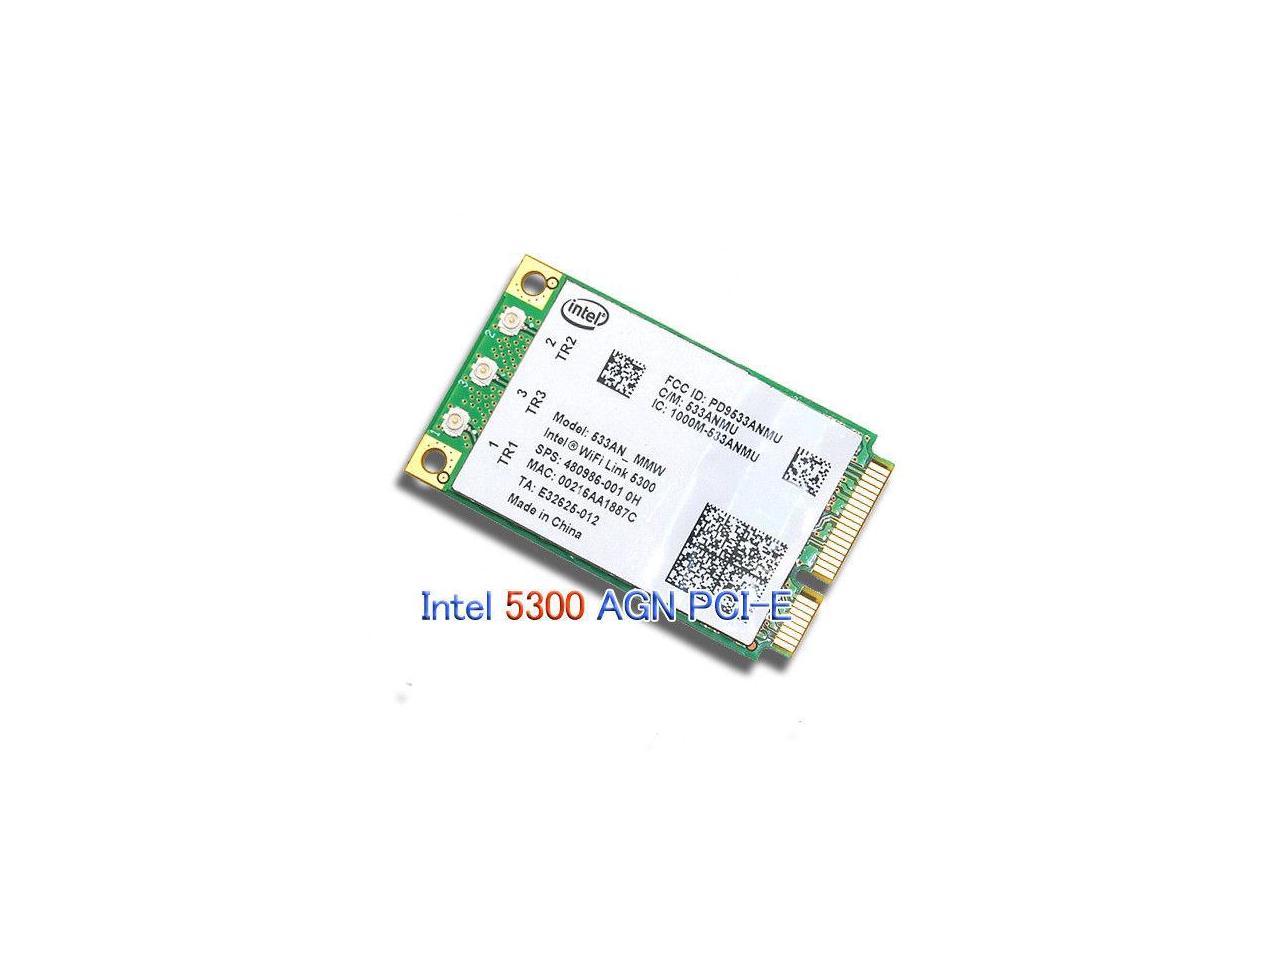 intel r wifi link 5100 agn driver for windows 7 download